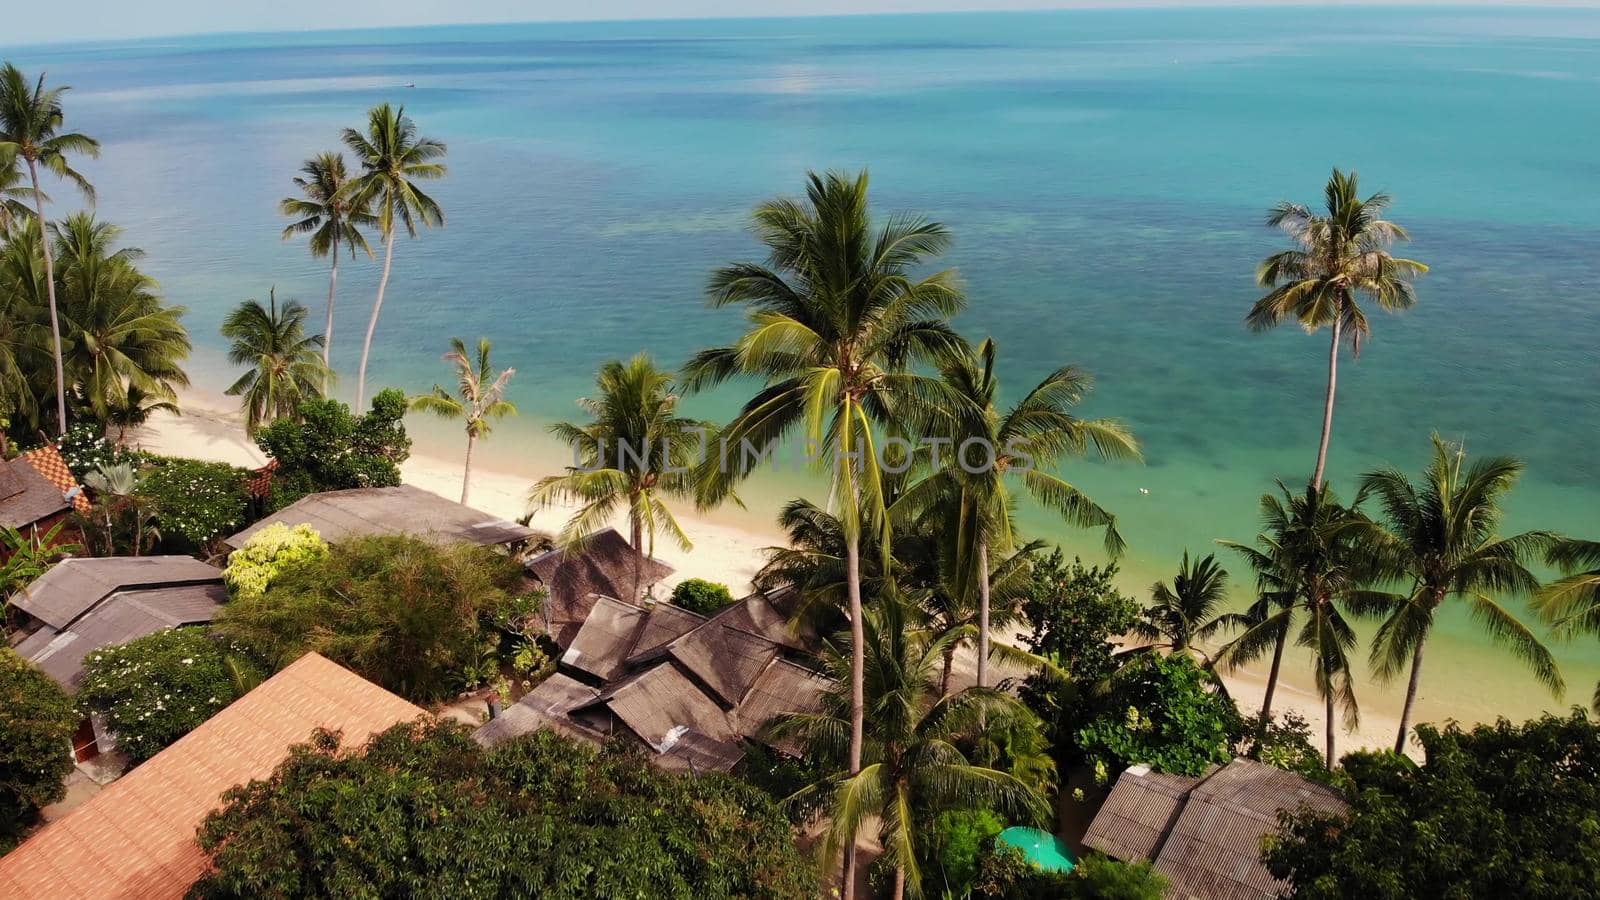 Palms on beach near blue sea. Drone view of tropical coconut palms growing on sandy shore of clean blue sea on resort.